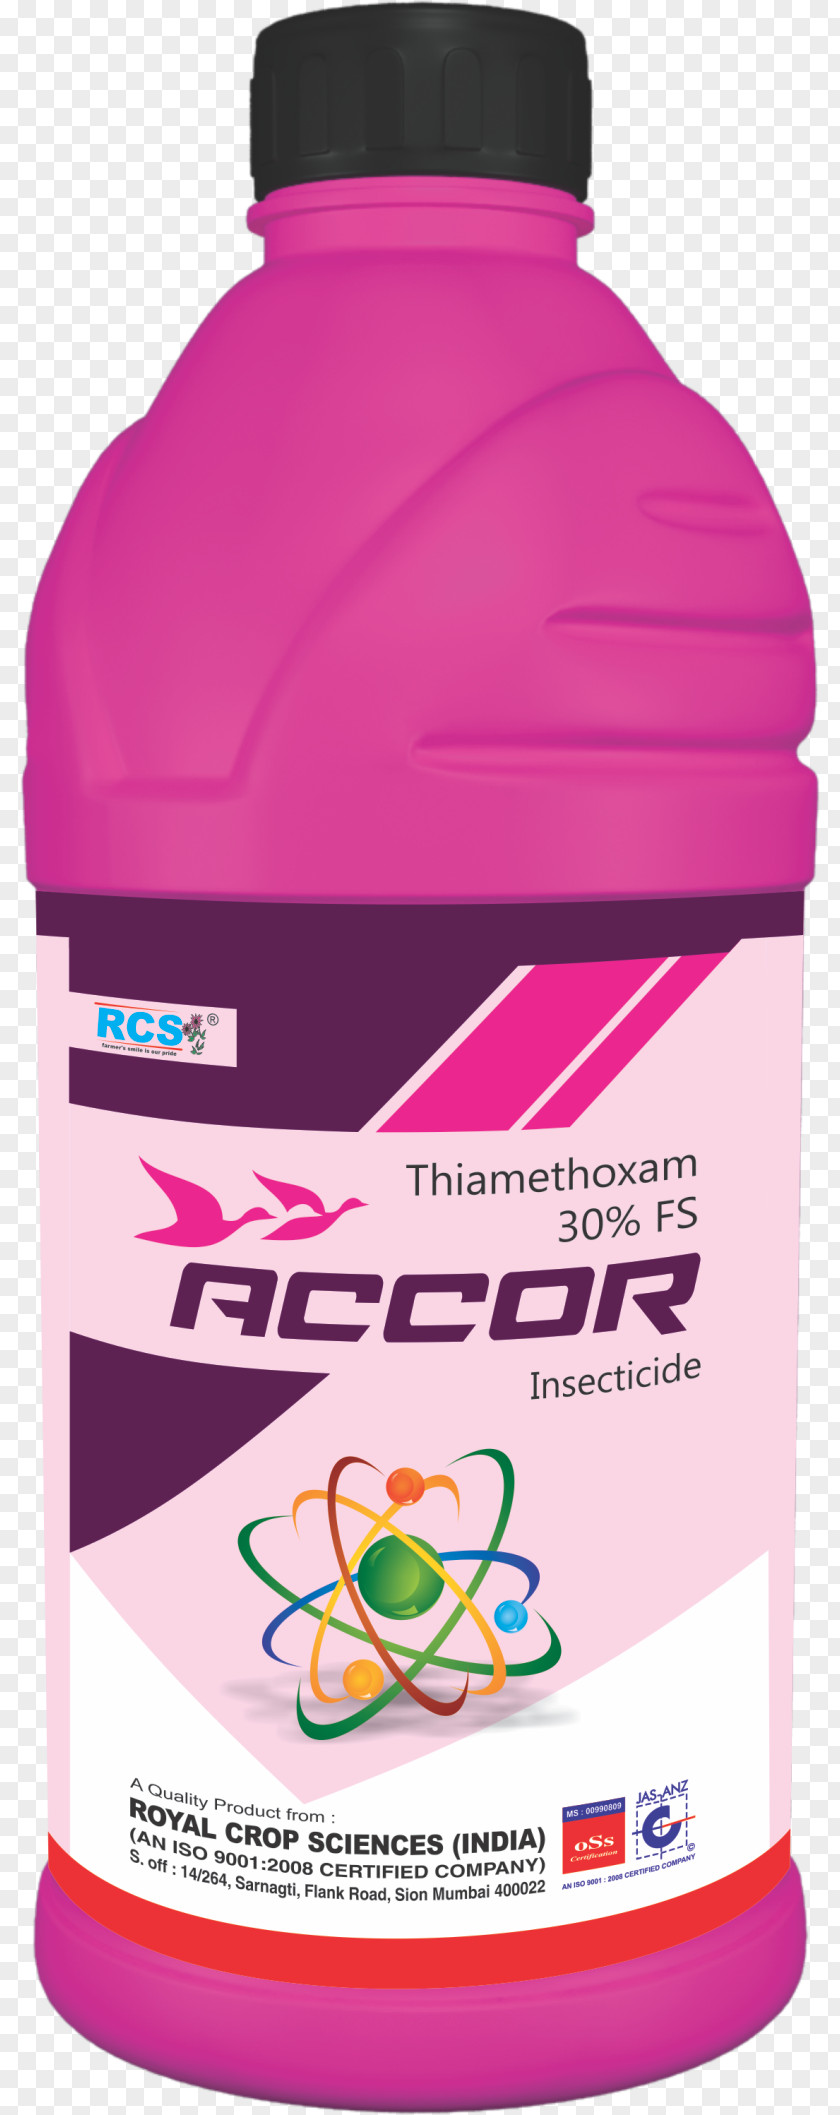 Accor Thiamethoxam ROYAL CROP SCIENCE (INDIA) Rich Communication Services Rice PNG